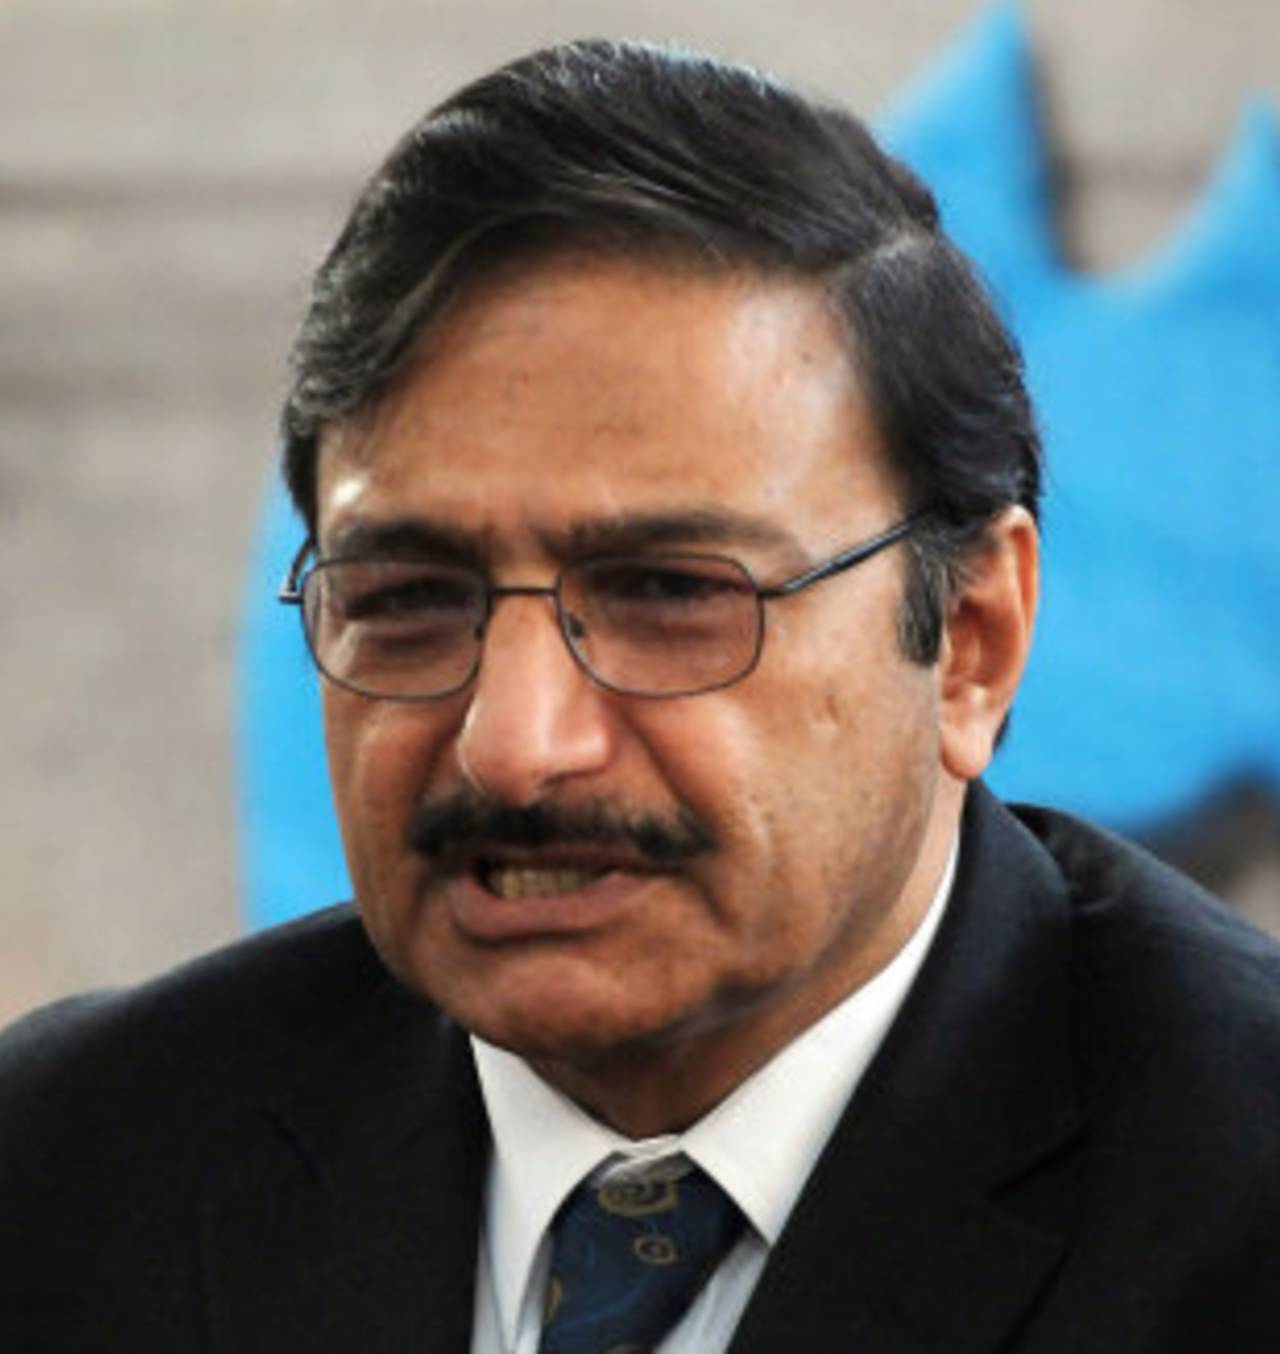 Zaka Ashraf, who has been the PCB's chairman since 2011, was elected to a fresh four-year term in the role earlier this month&nbsp;&nbsp;&bull;&nbsp;&nbsp;AFP